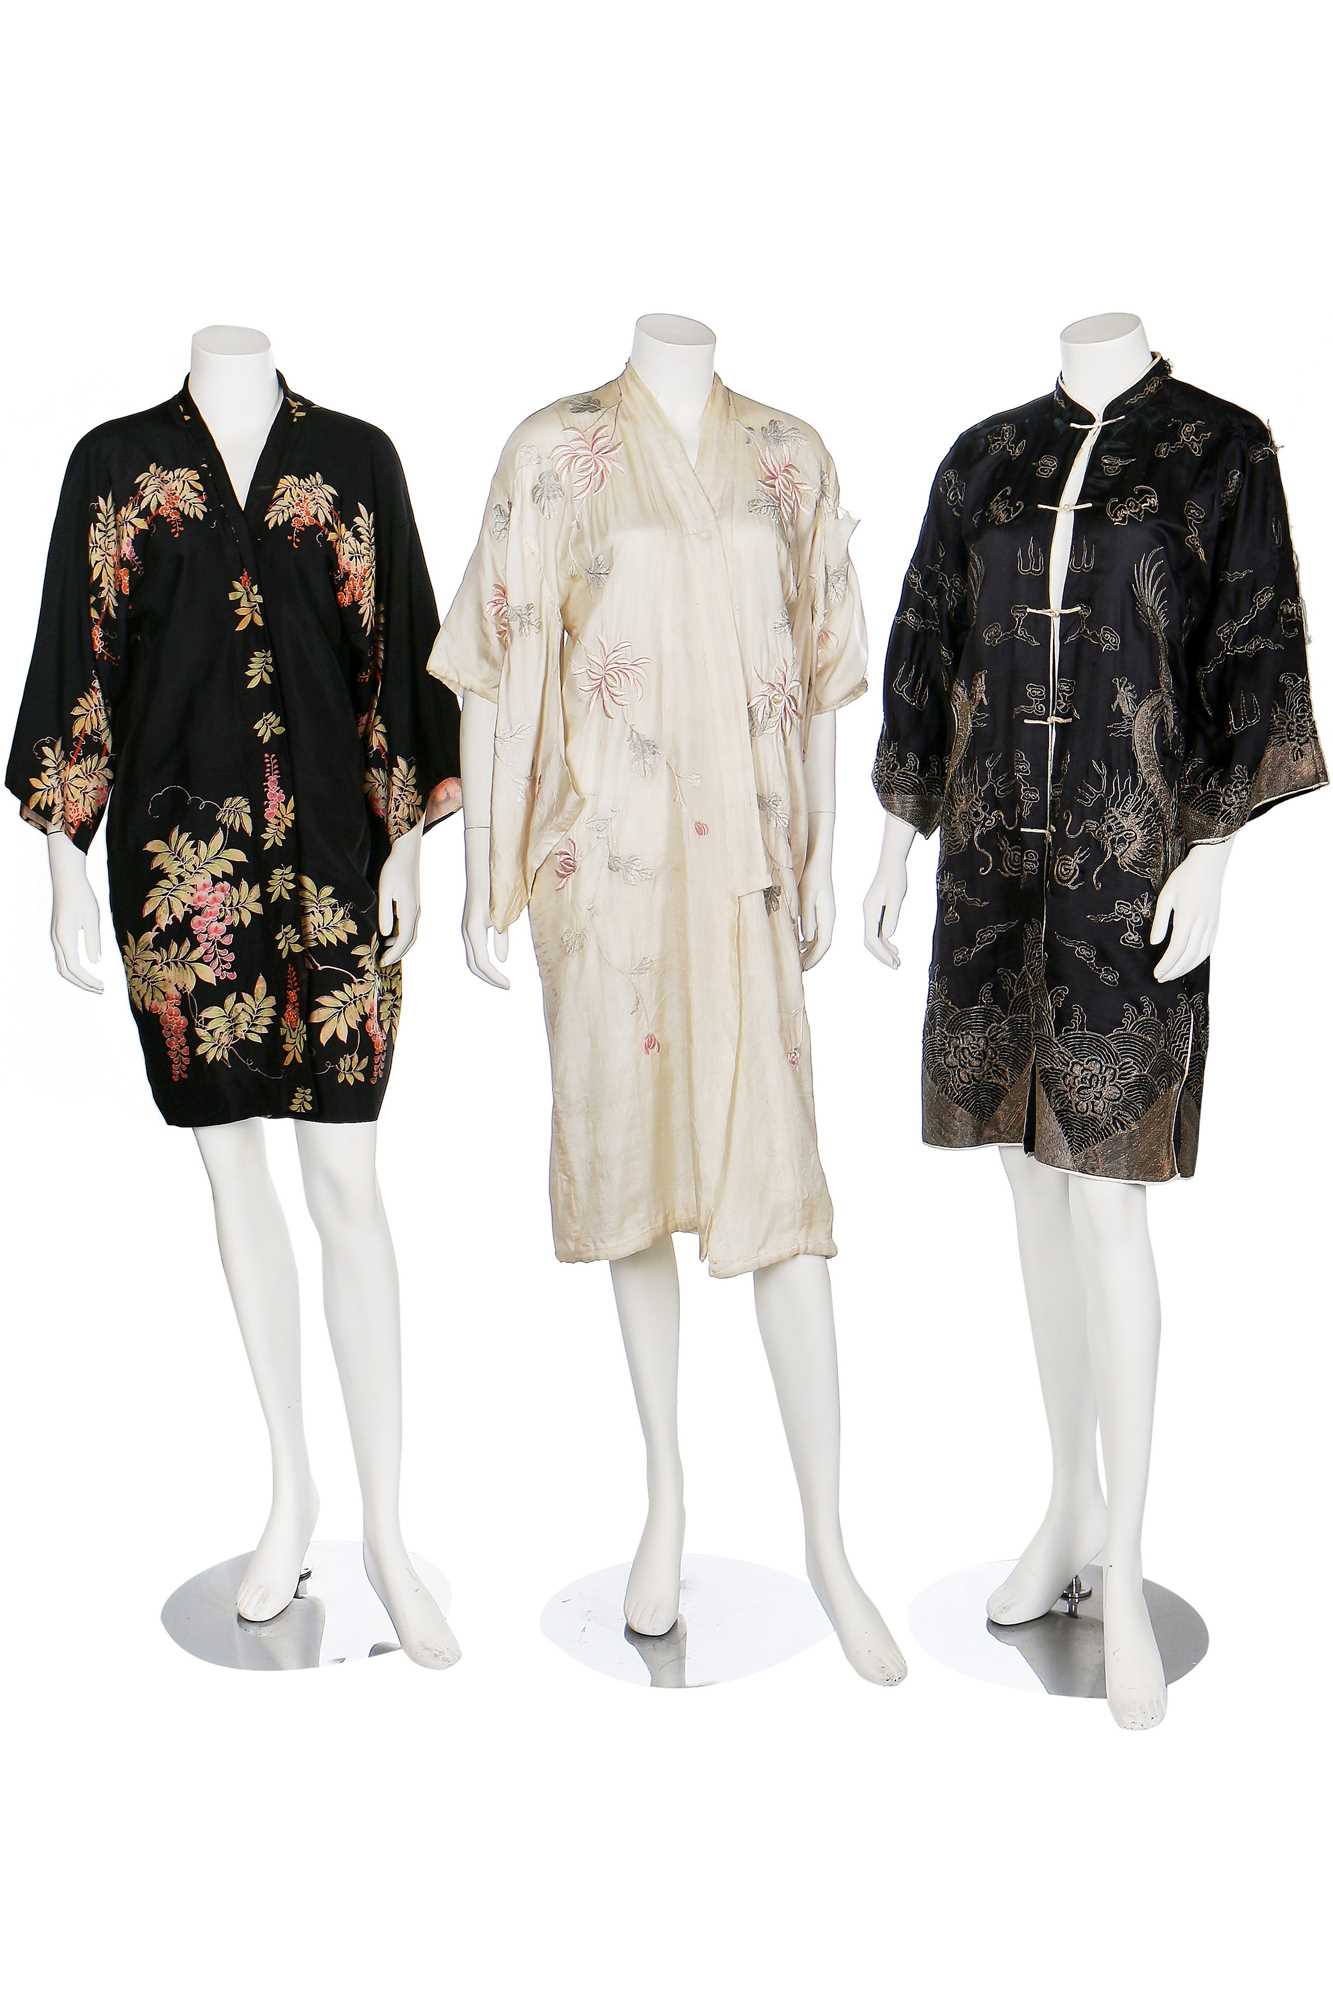 Lot 64 - A group of kimonos and housecoats, mainly 1930s